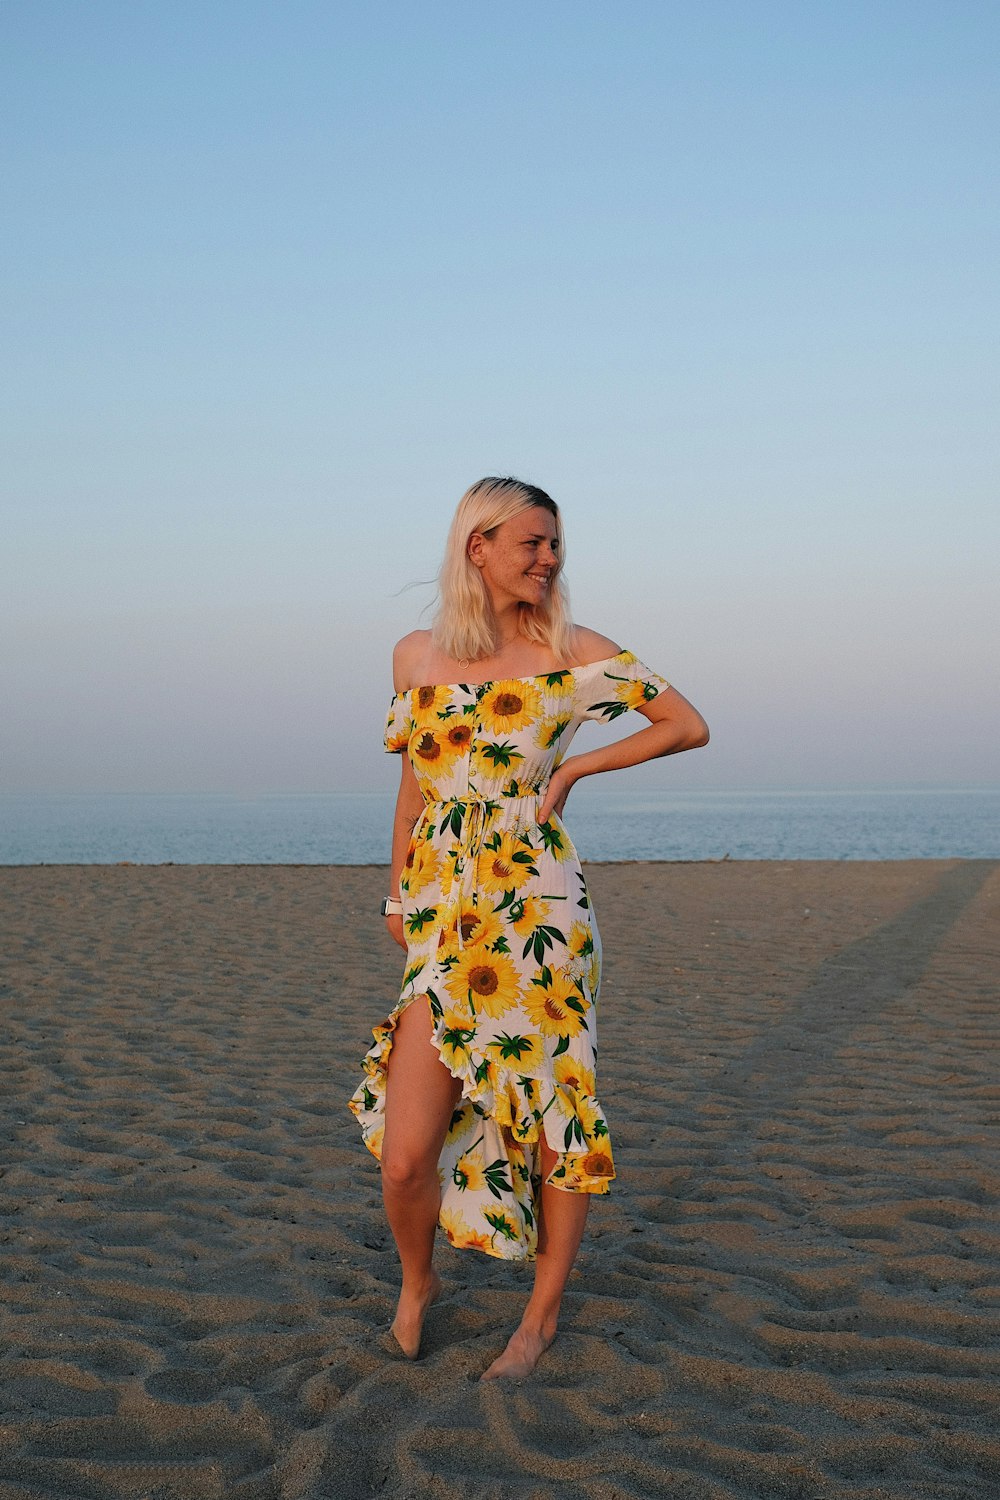 woman in white and yellow floral dress standing on beach during daytime